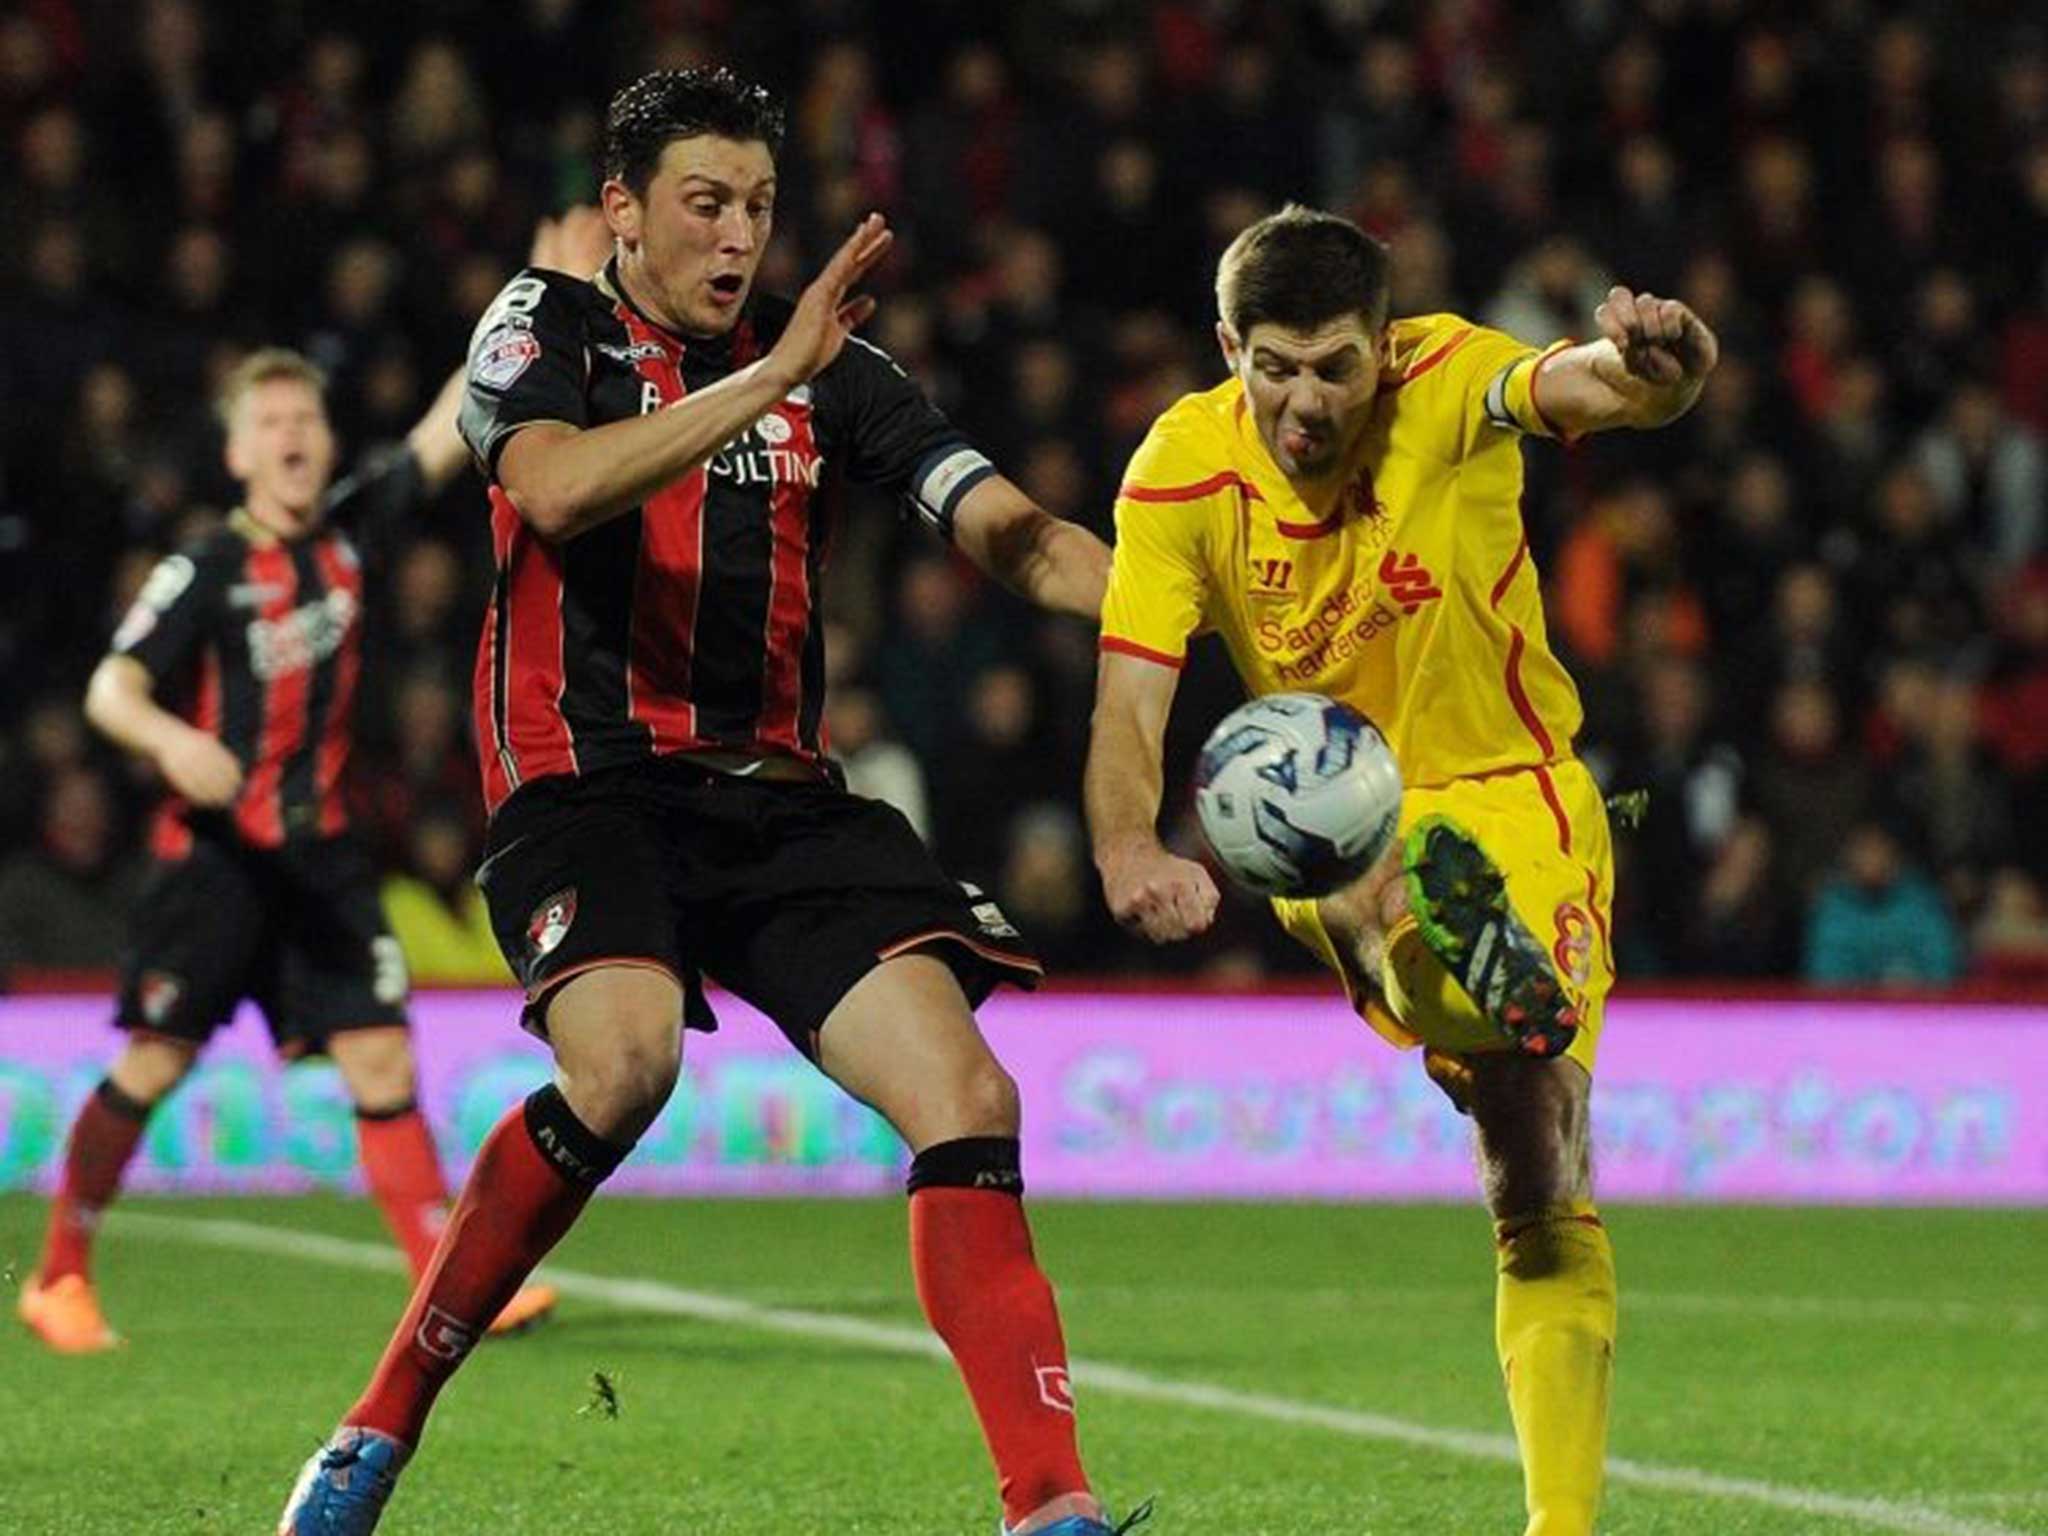 Steven Gerrard fights for the ball during Liverpool’s victory over Bournemouth on Wednesday